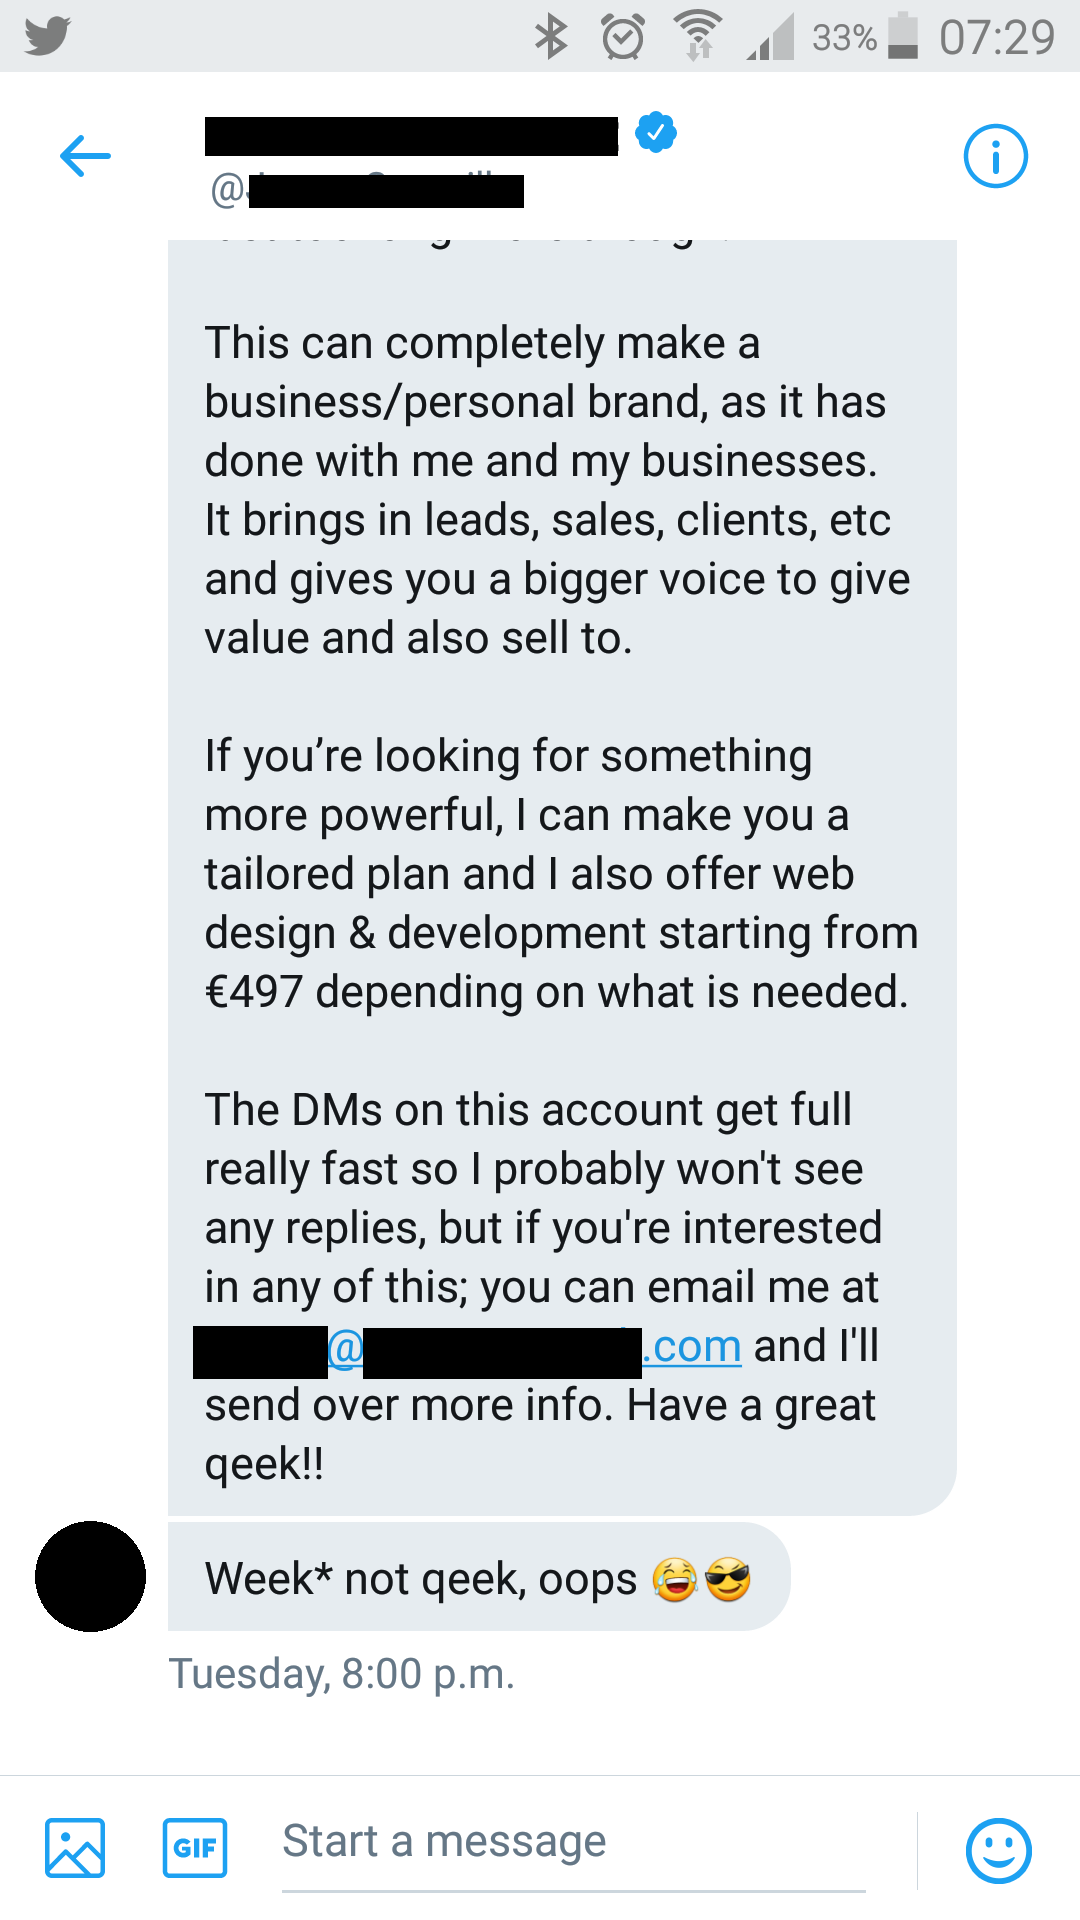 week* not qeek, oops - one of the worst auto DMs on Twitter.